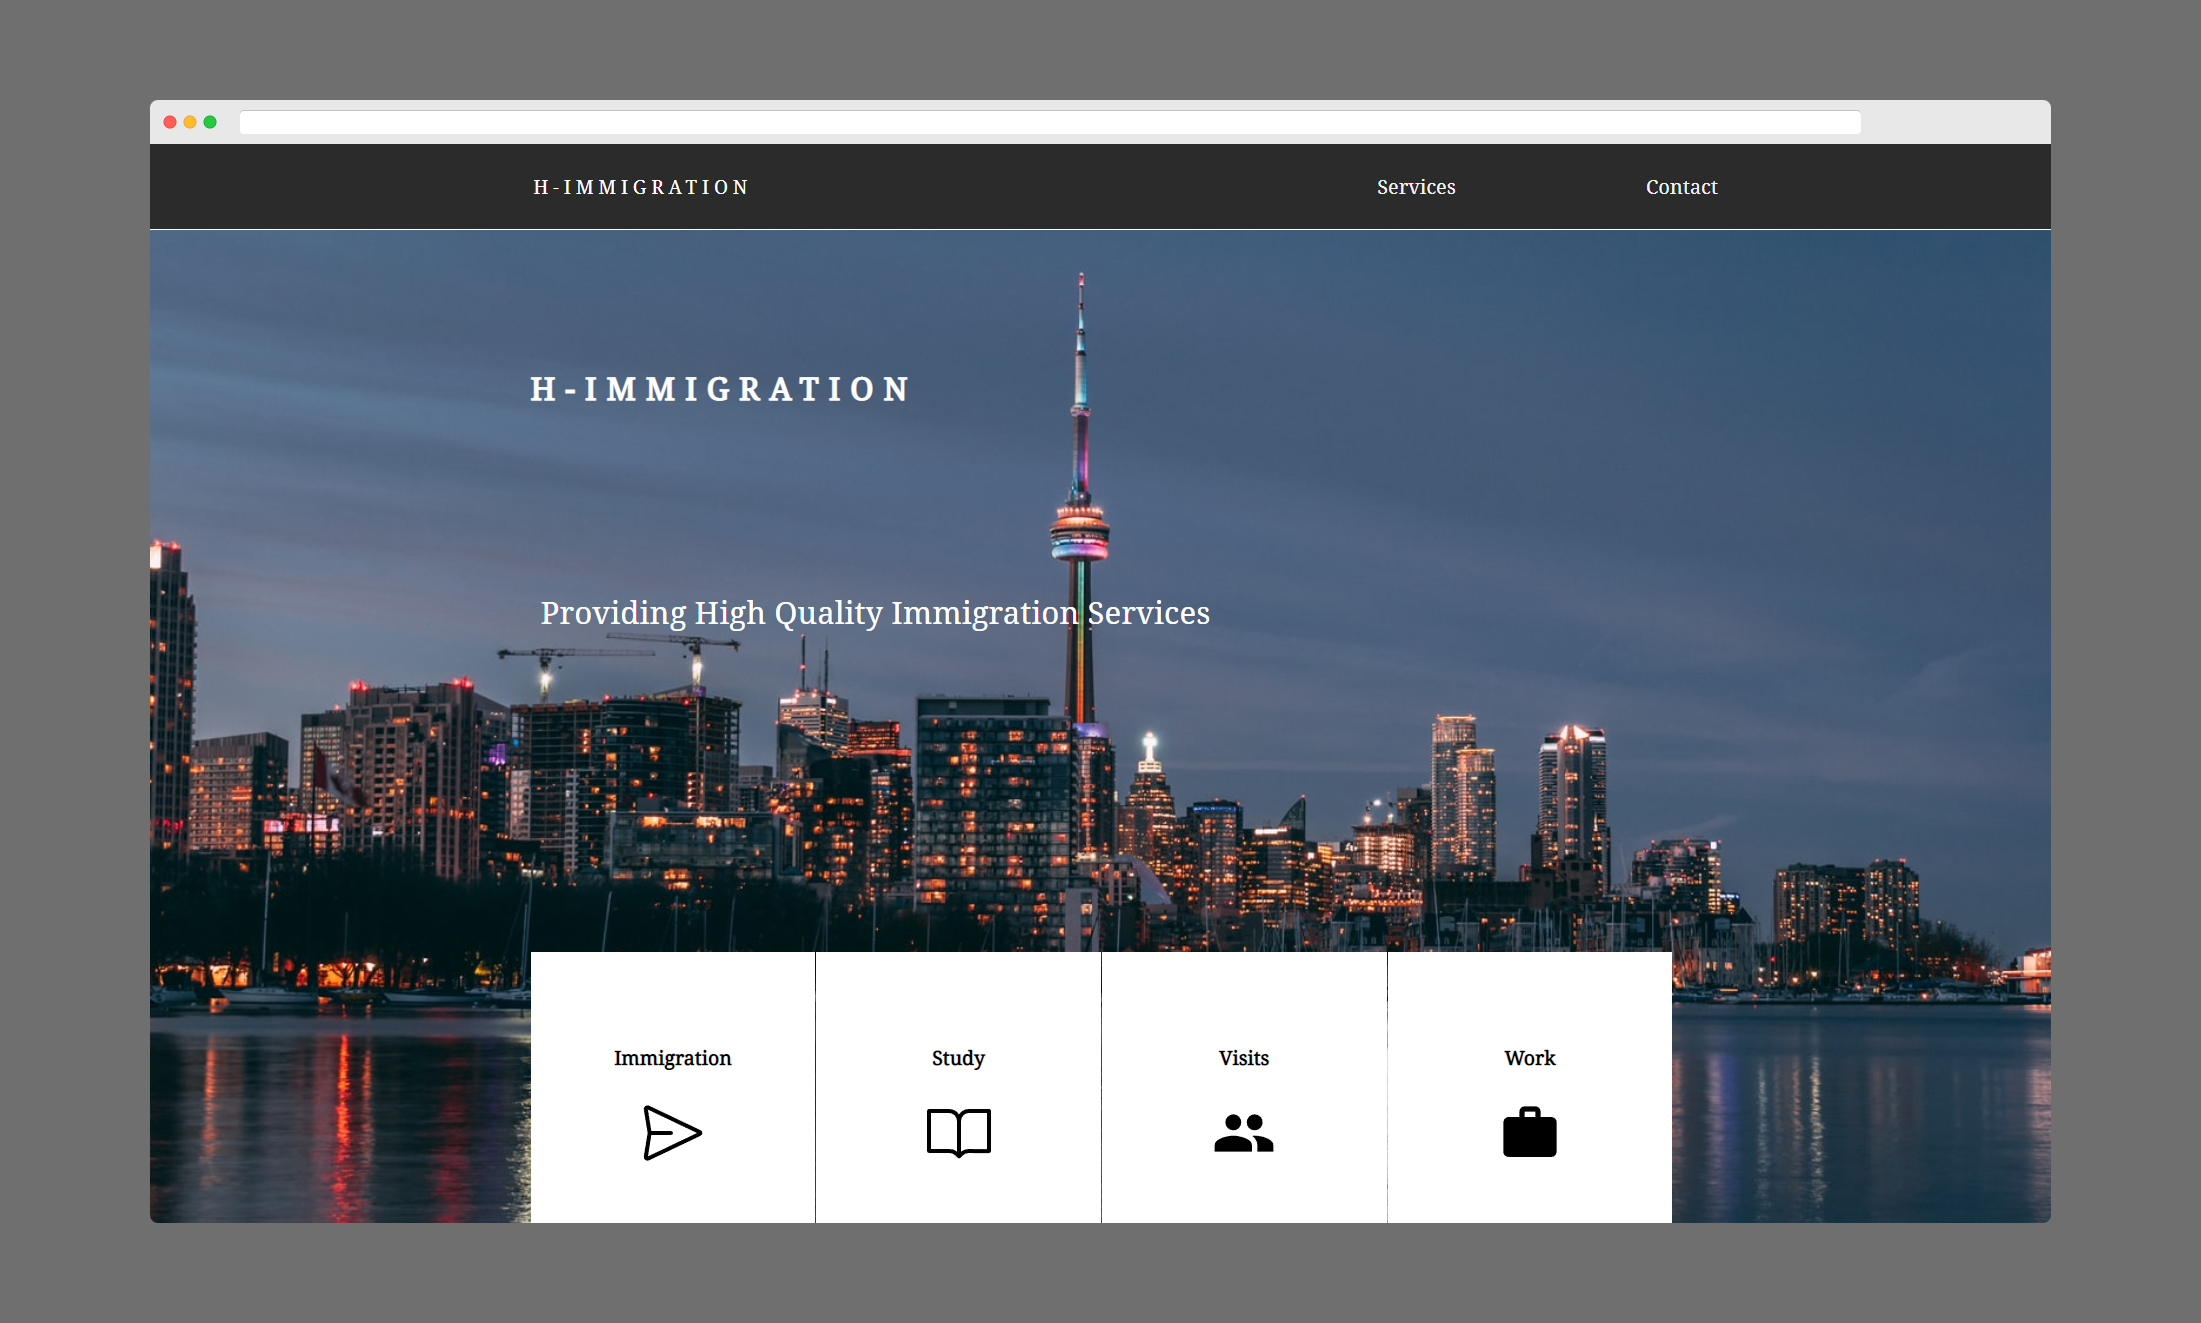 Image of my h-immigration website project.